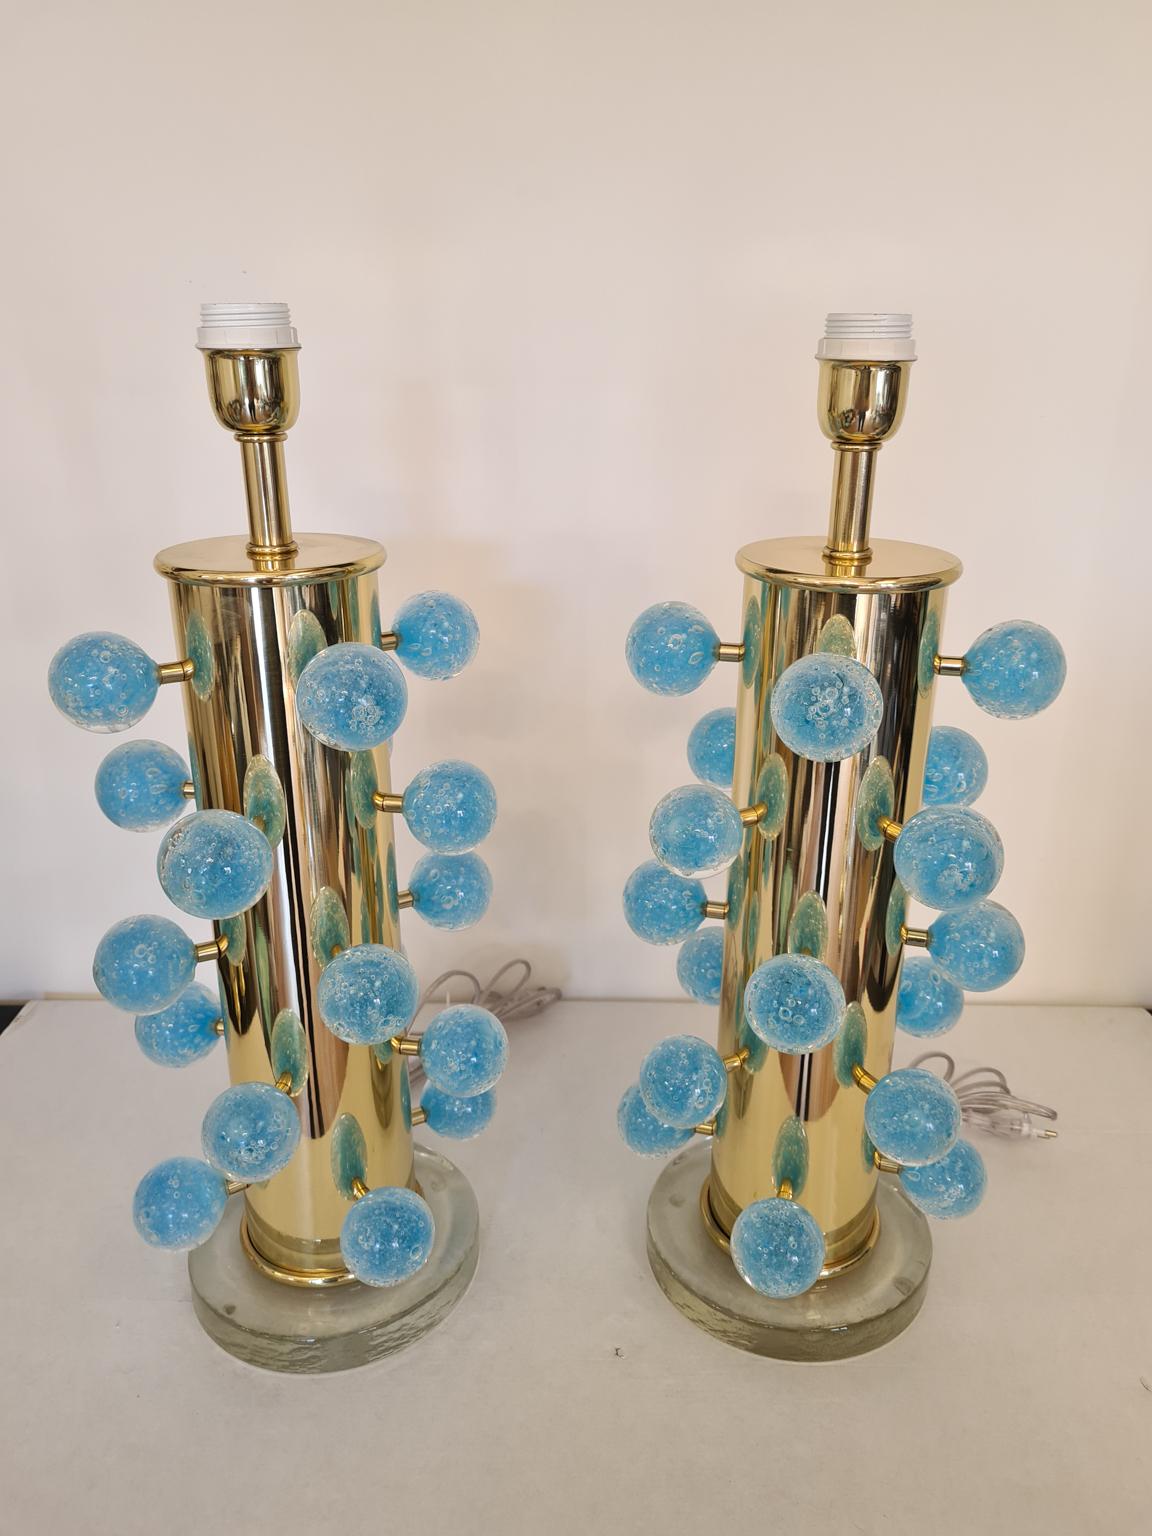 Exclusive pair of Murano glass table lamps with Pulegoso aquamarine spheres, transparent crystal base and gold chromed frame. 
Pulegoso processing are bubbles inside the color.
Lamp made with great care and precision by our master glassmaker